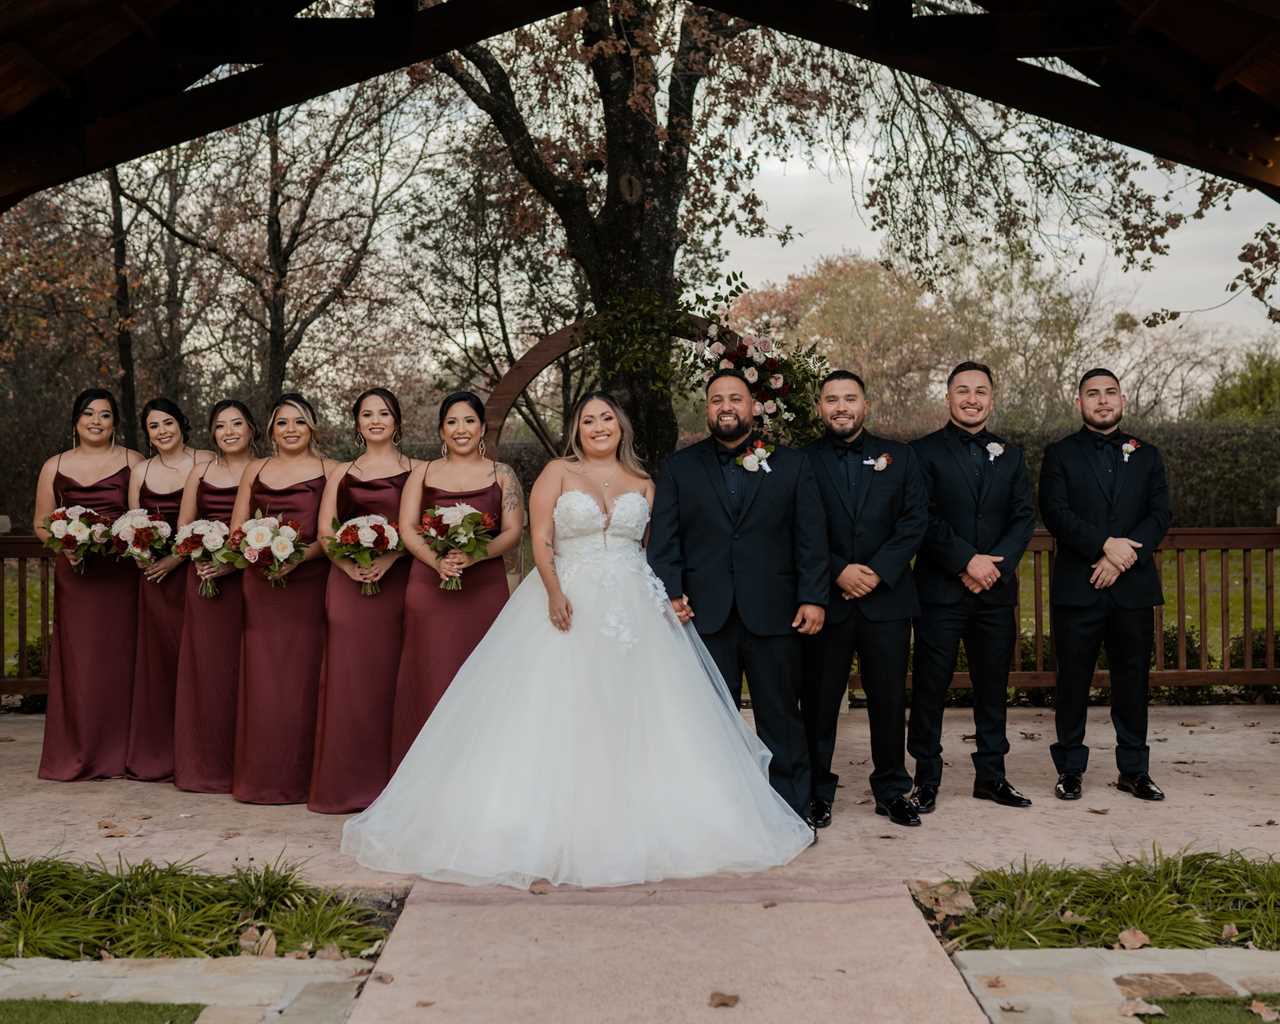 wedding party photo with bridesmaids and groomsmen